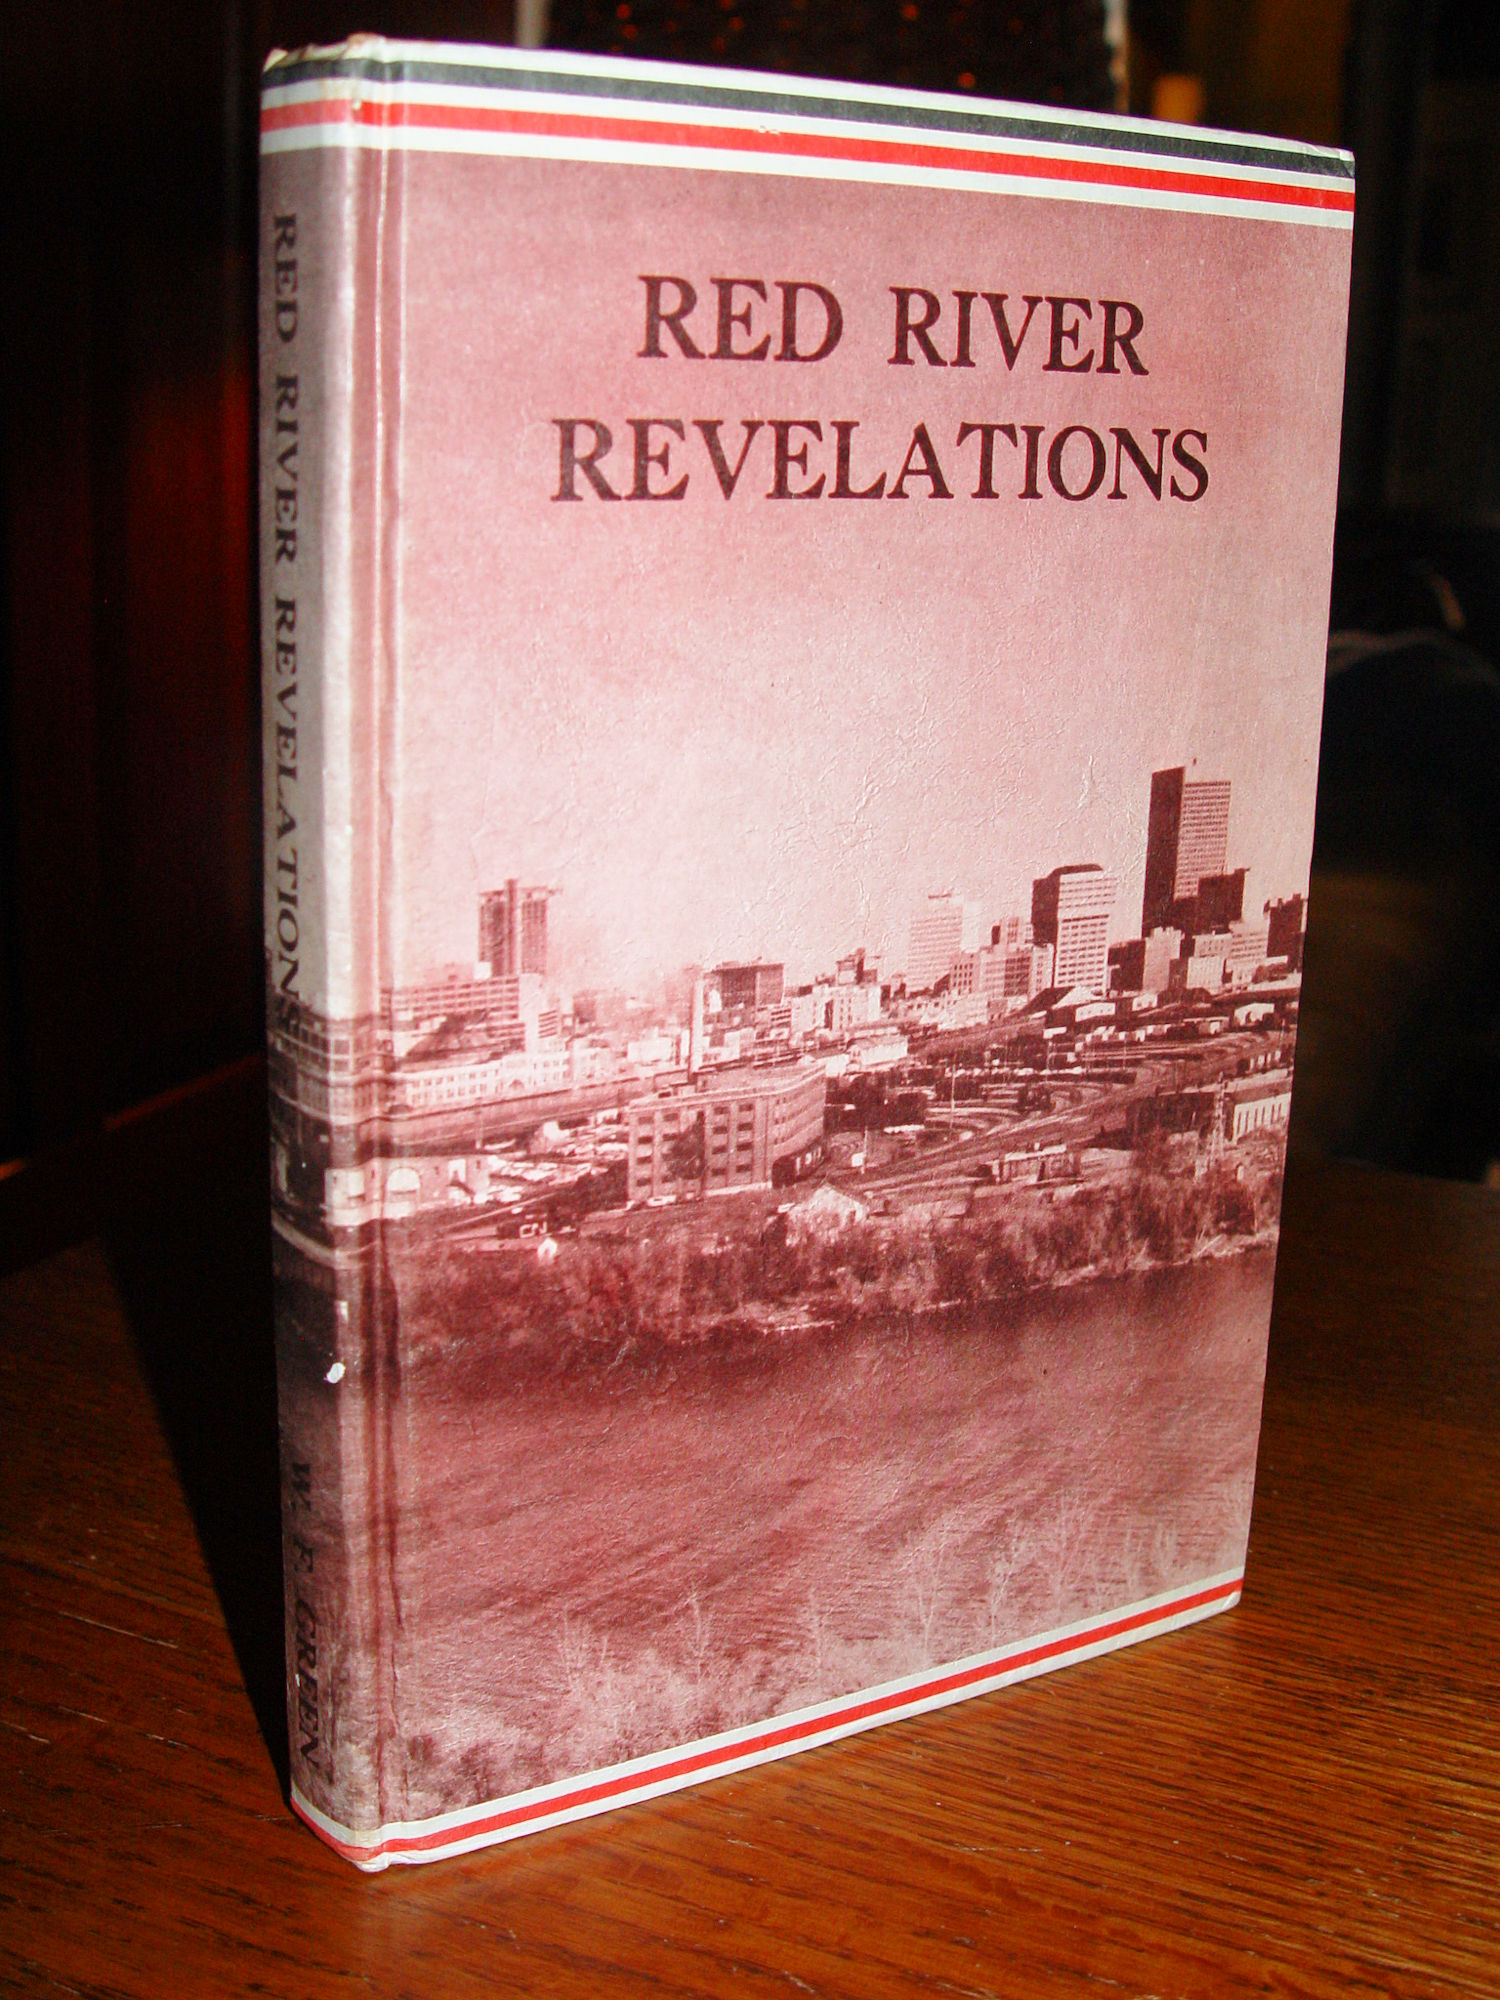 Red River Revelations by Wilson F. Green ;
                        Red River Settlement No. 159 in Limited Signed
                        Edition